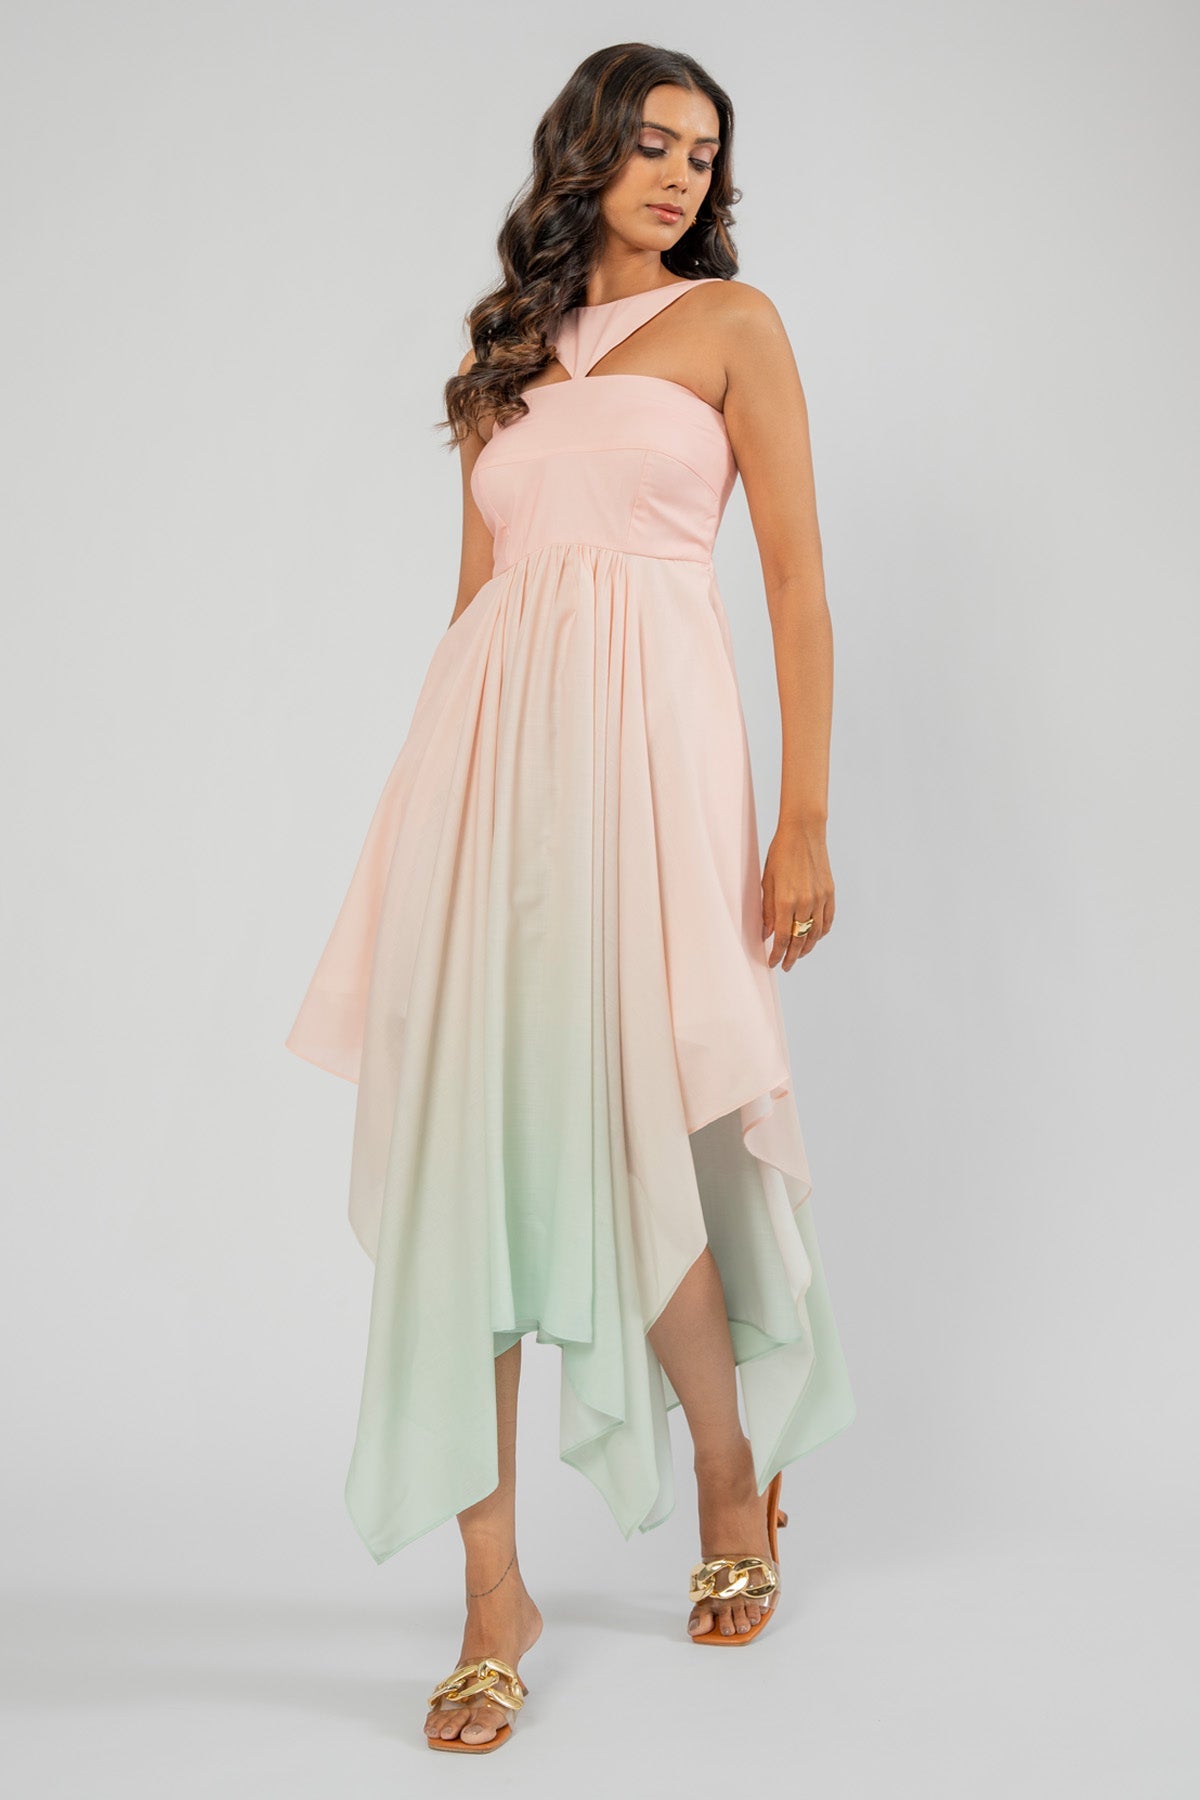 The Decem Ally Pink And Mint Asymmetric Dress for Women online available at scrollnshops